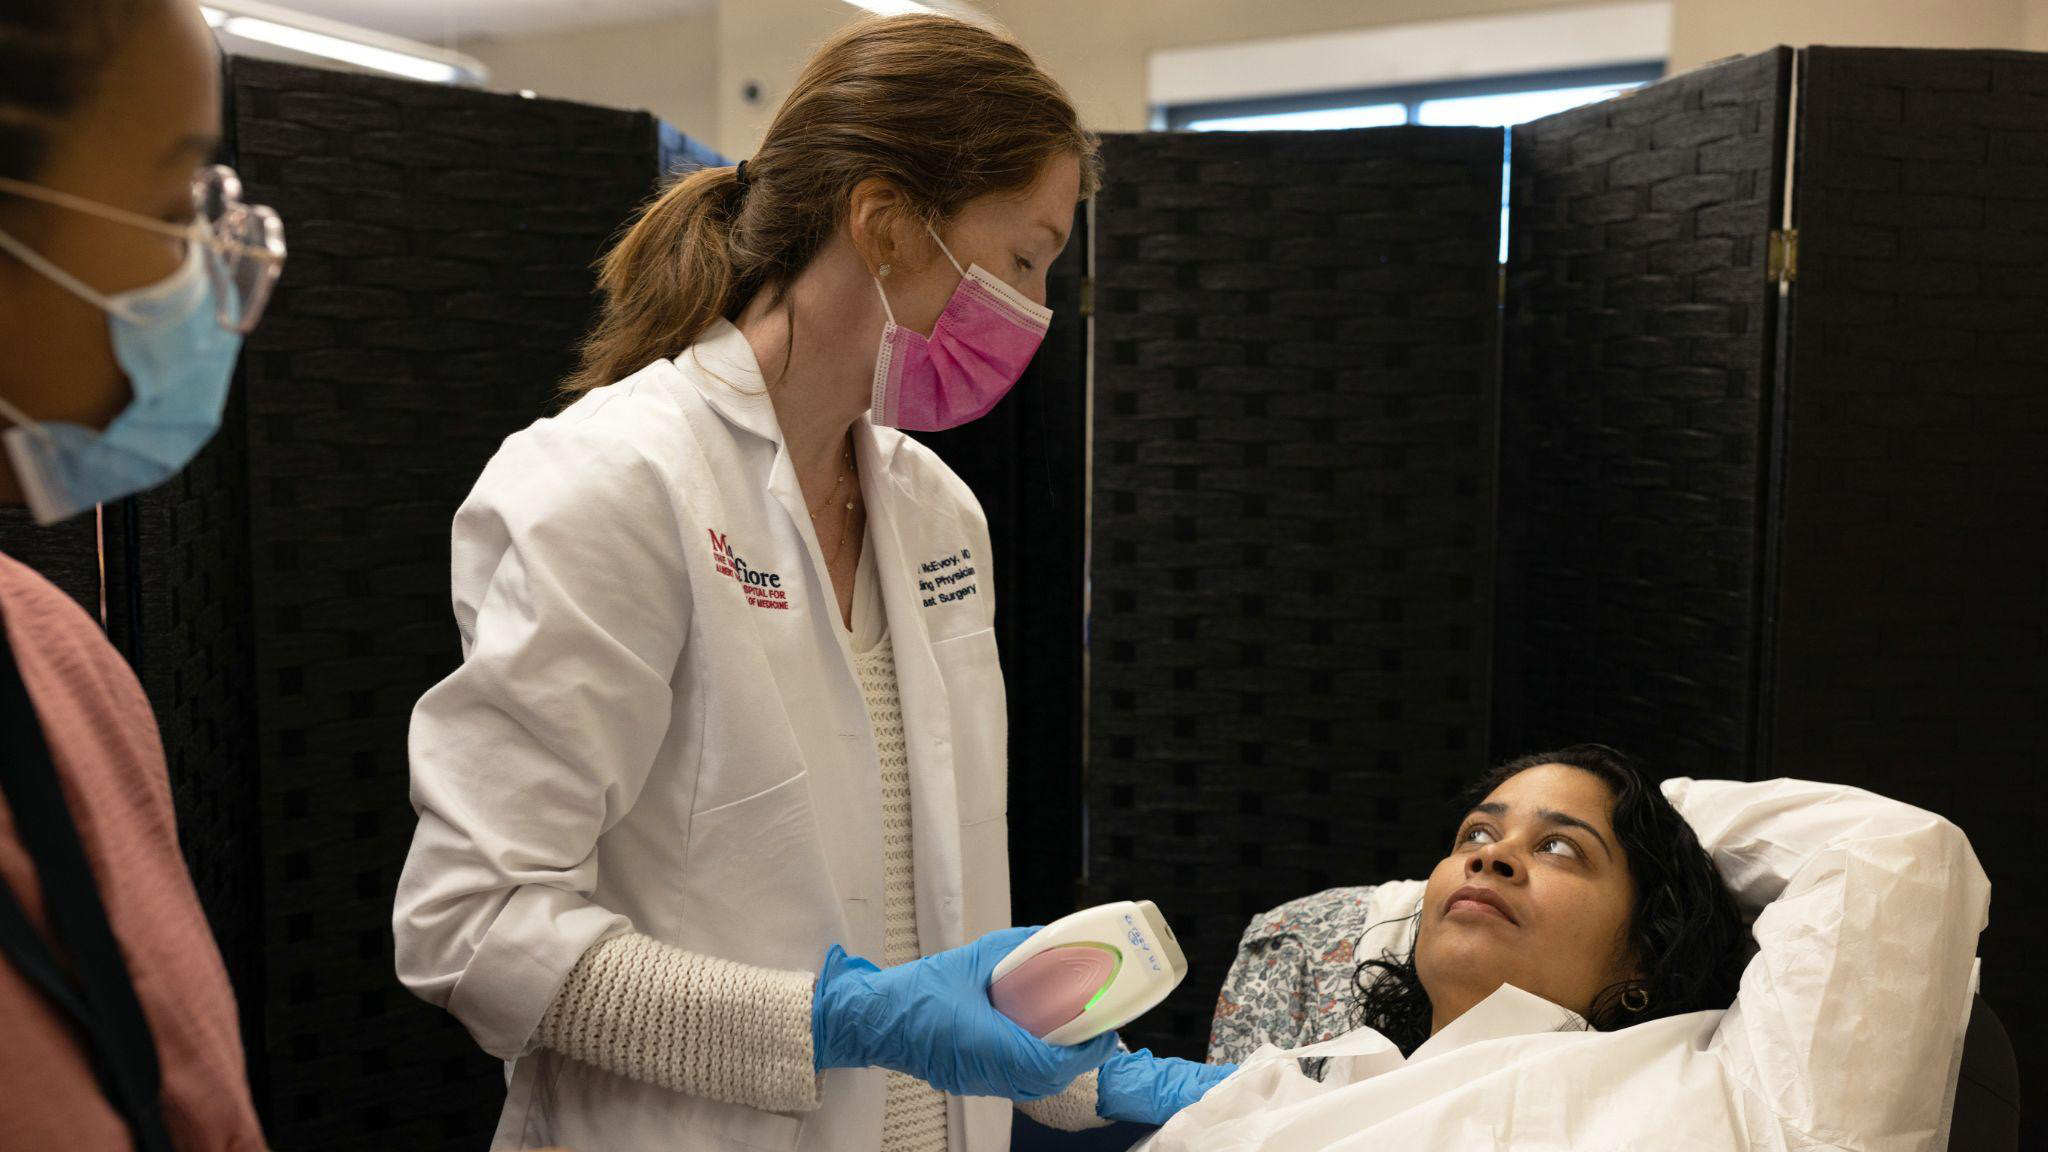 Two medical professionals consult with a patient in a private screened area.  The doctor holds the iBreastExam device.